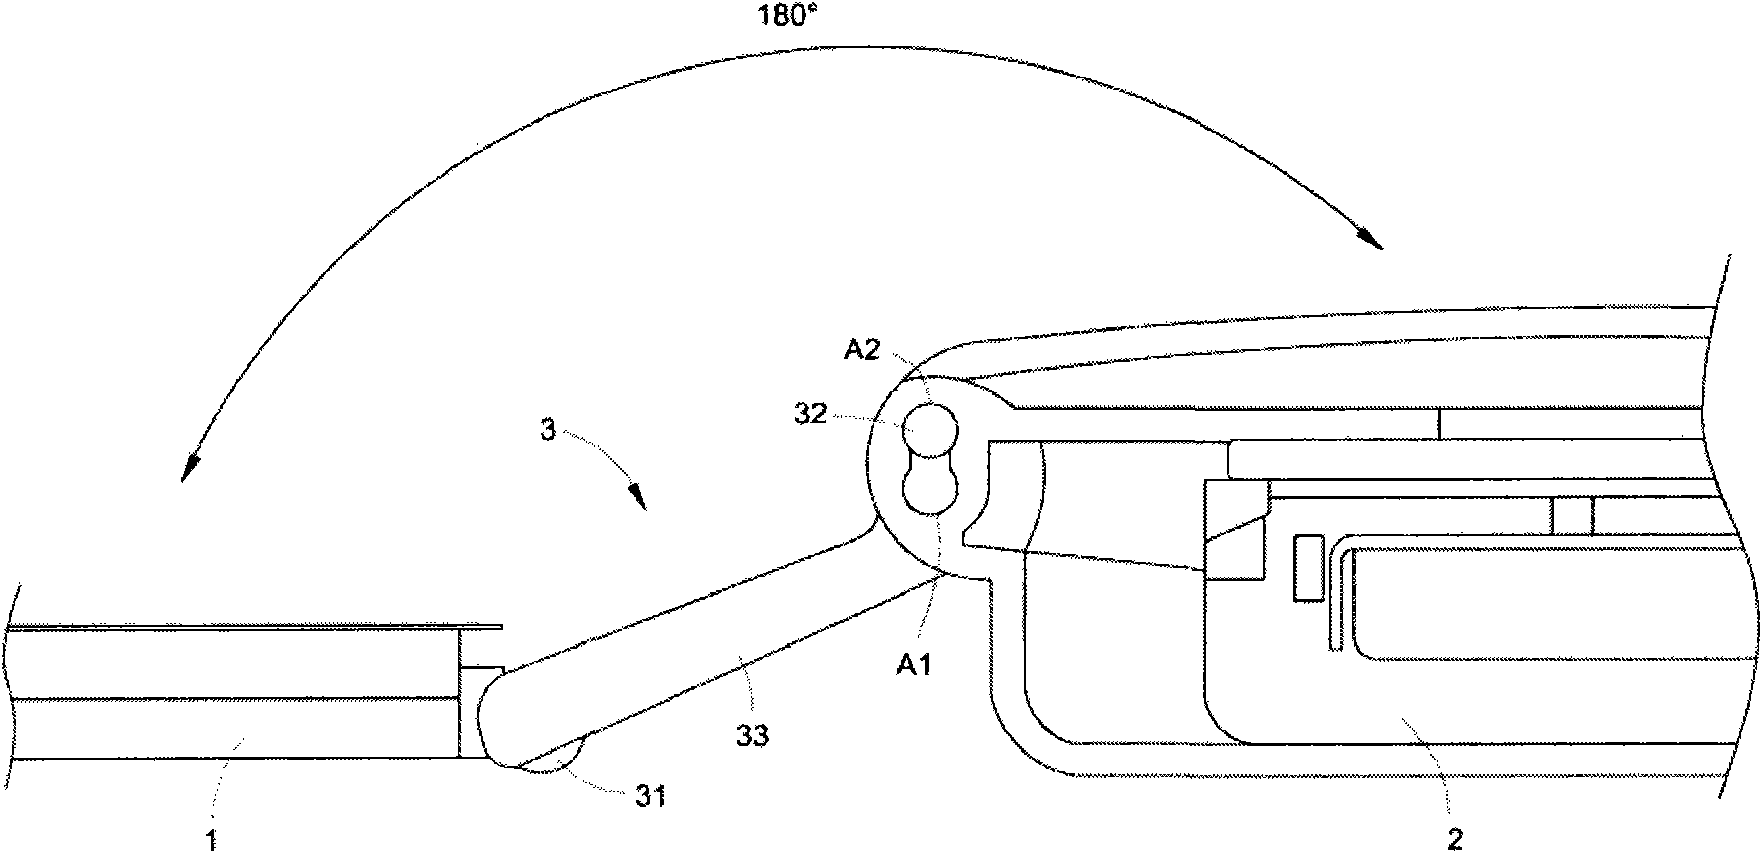 Image scanner with automatic paper feeding device